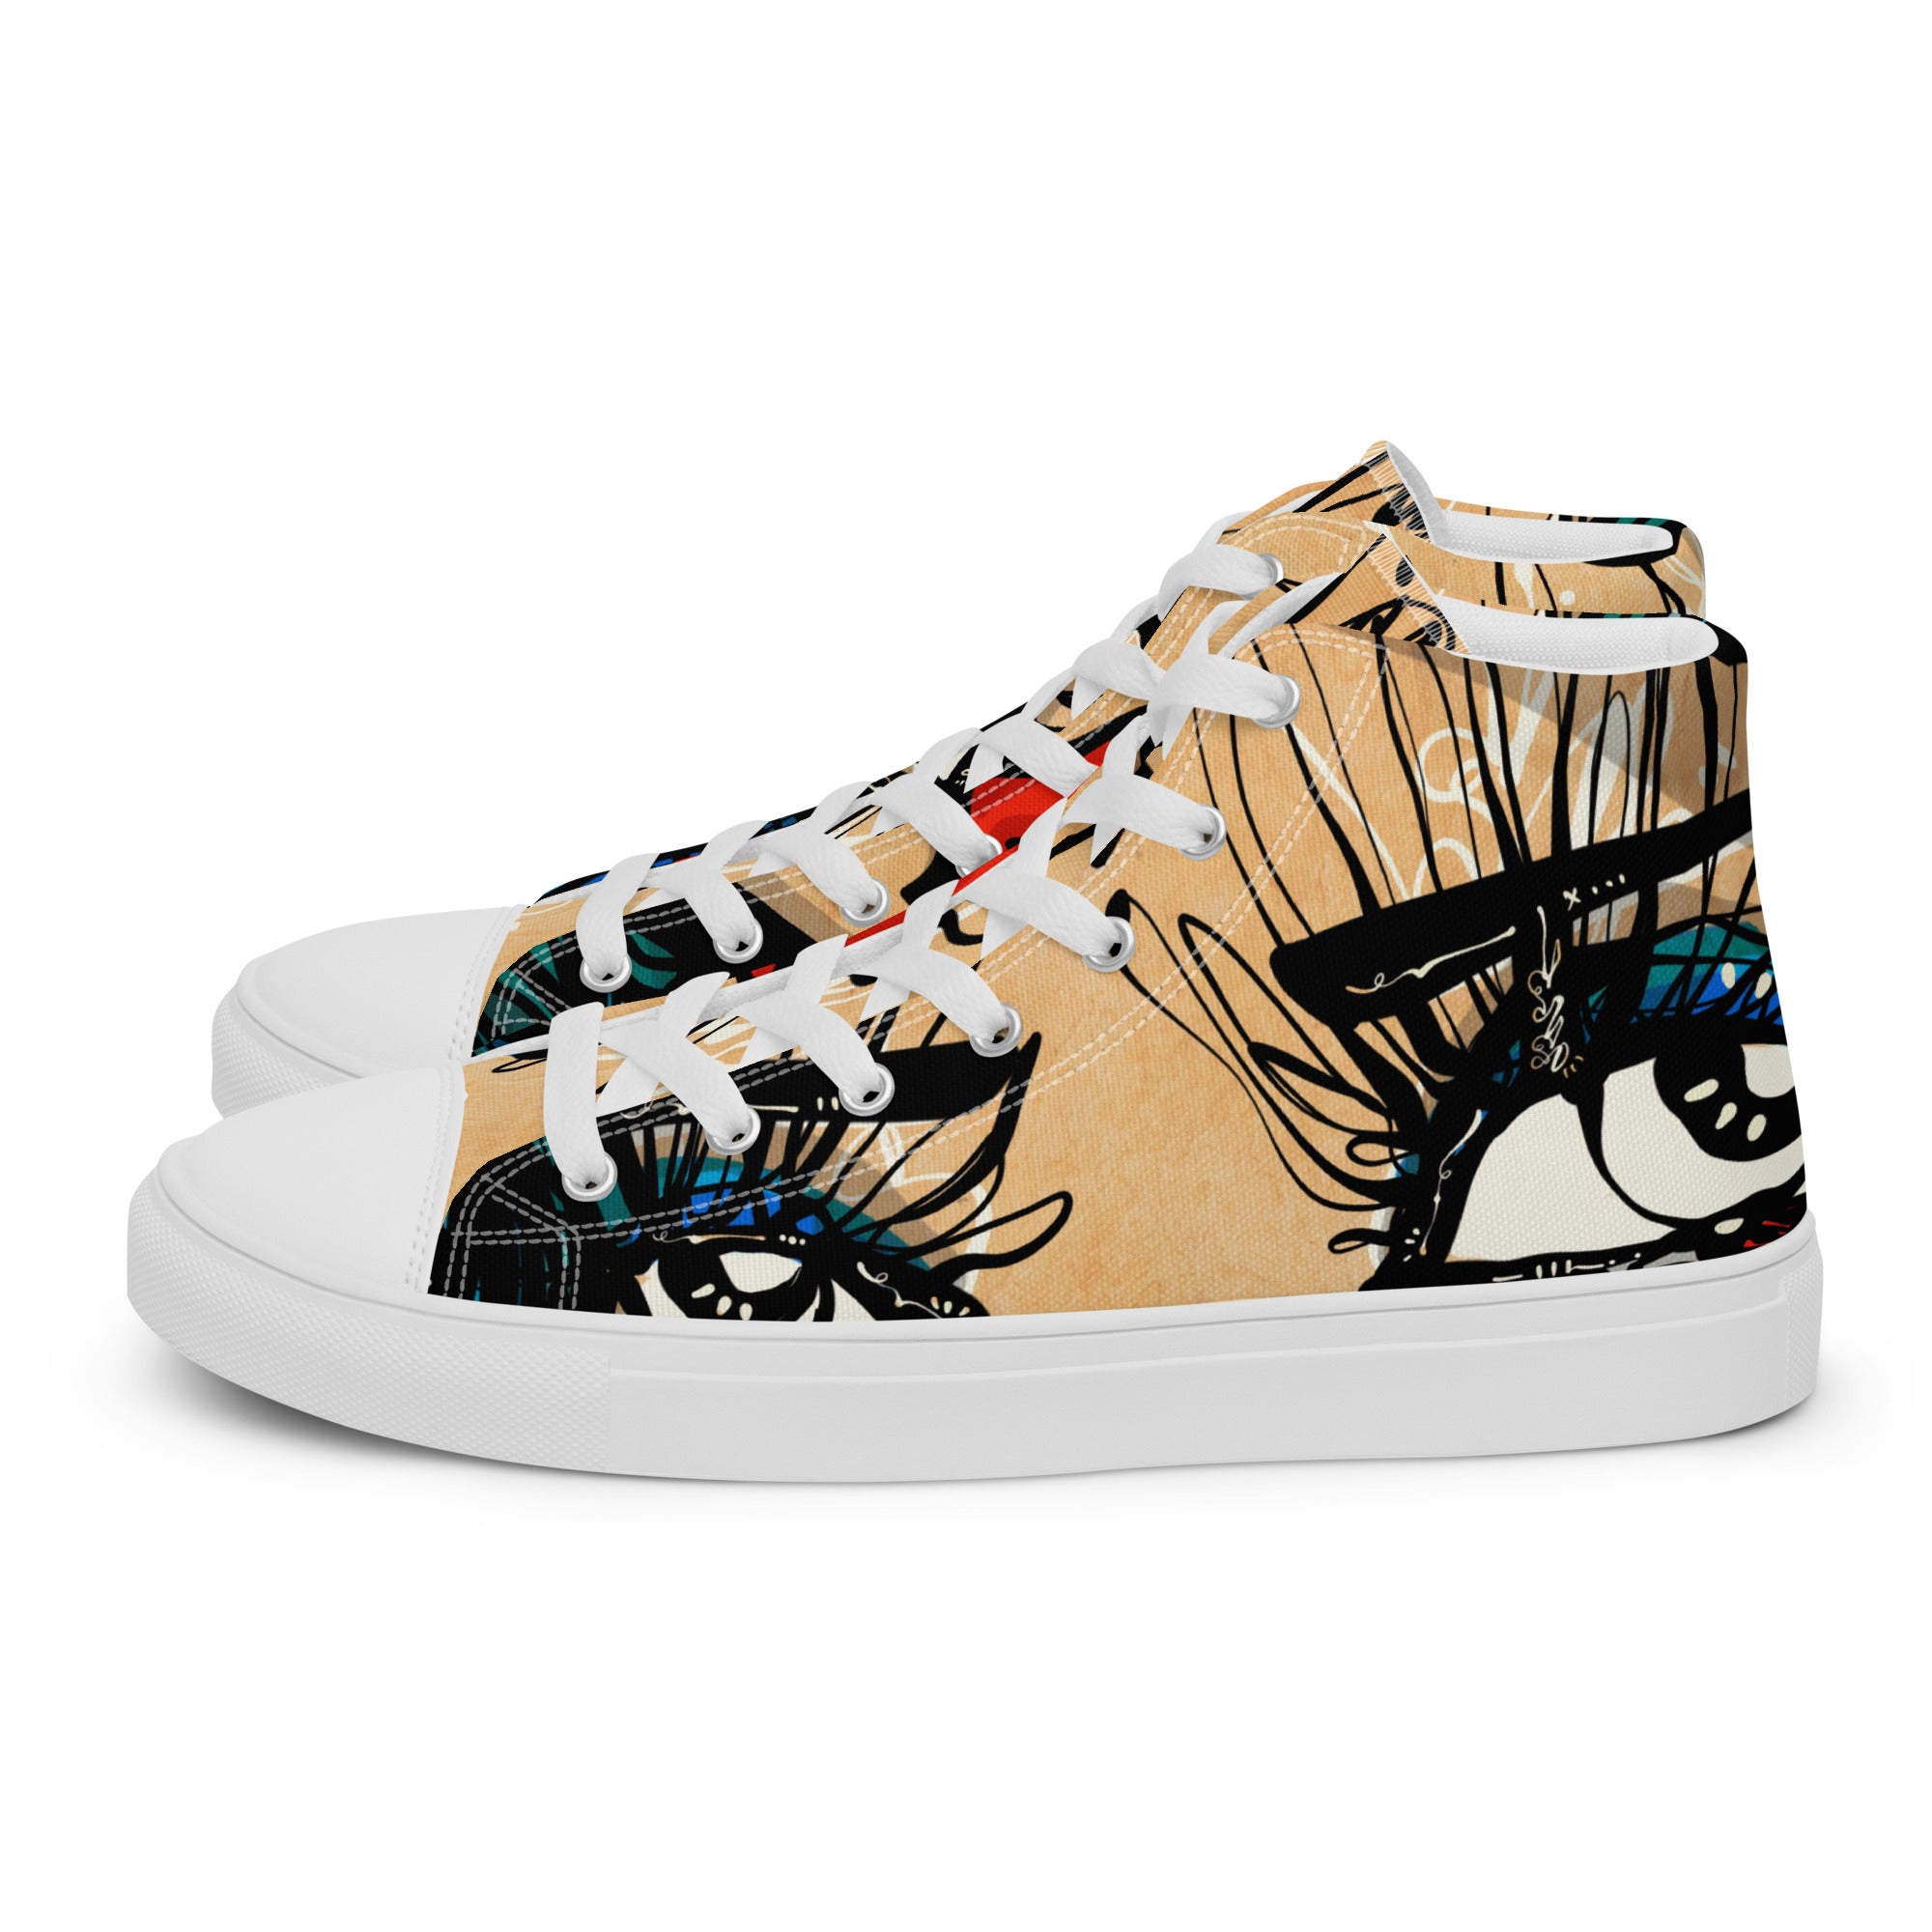 Tantric Soul by Sabet Women’s high top canvas shoes